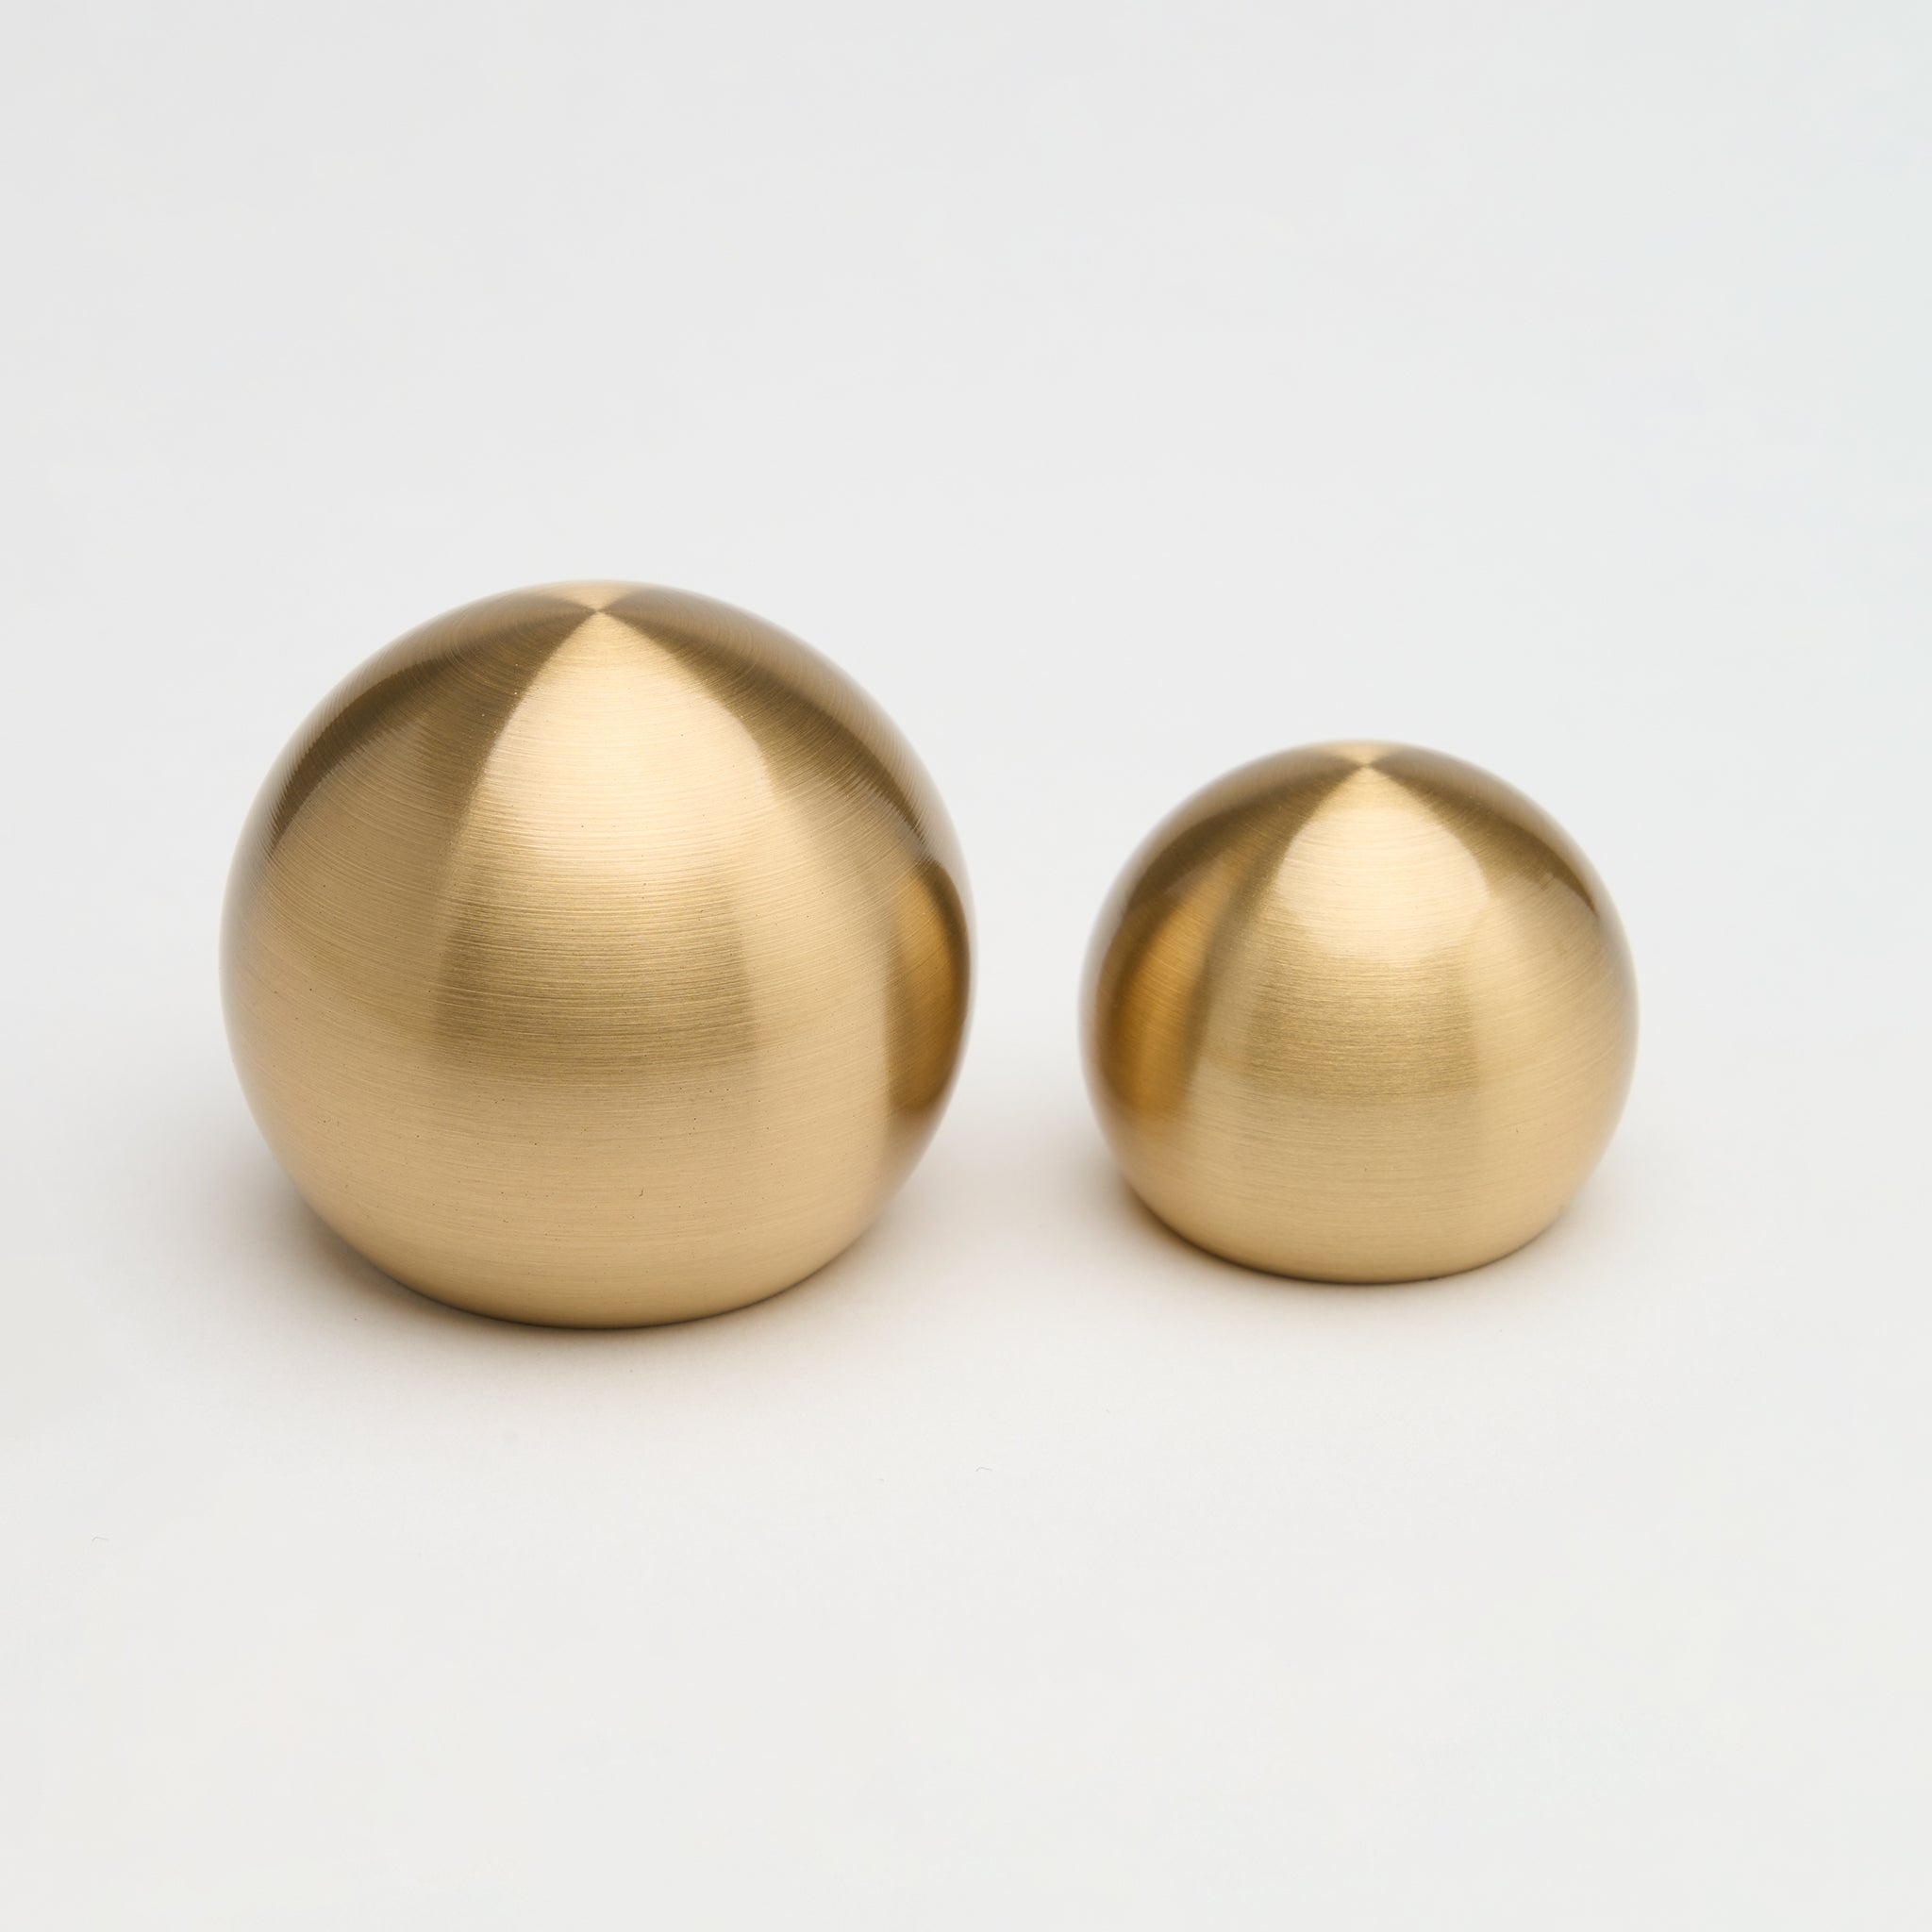 https://cdn.shopify.com/s/files/1/0565/6100/8816/products/lo-and-co-sphere-knobs-brass-shopify.jpg?v=1673233475